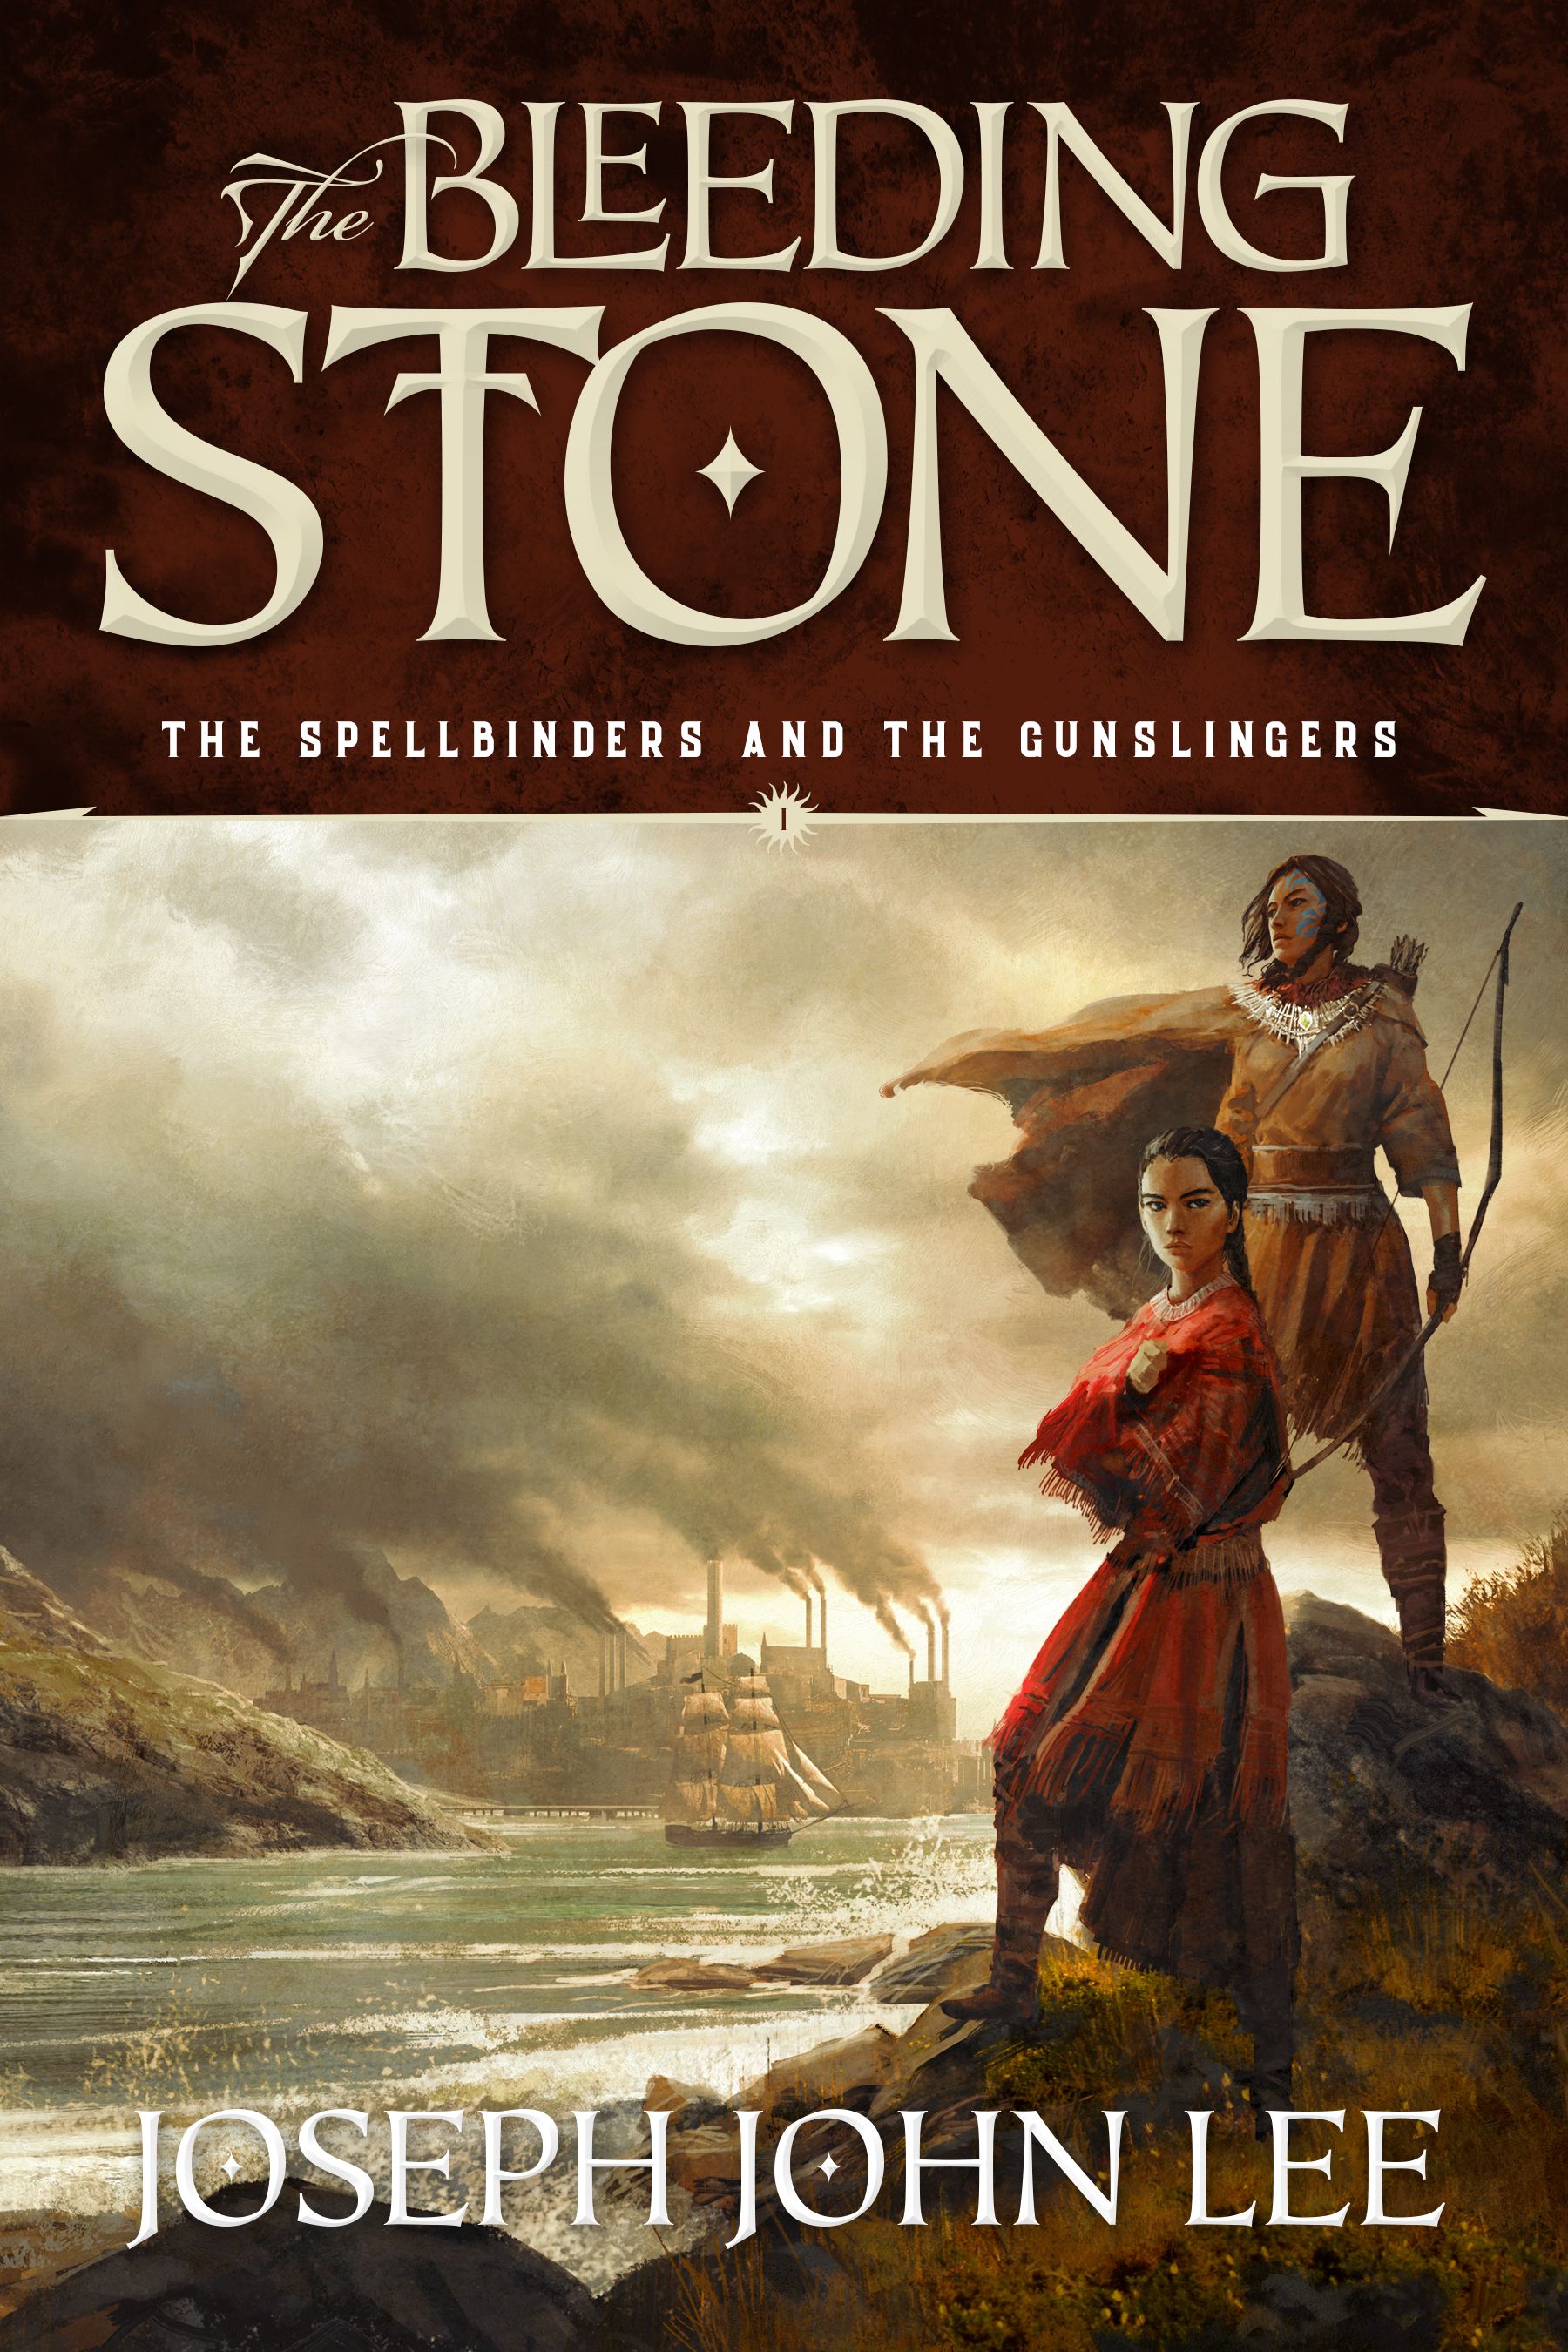 Cover art for The Bleeding Stone. Art by Felix Ortiz, Design by Shawn King